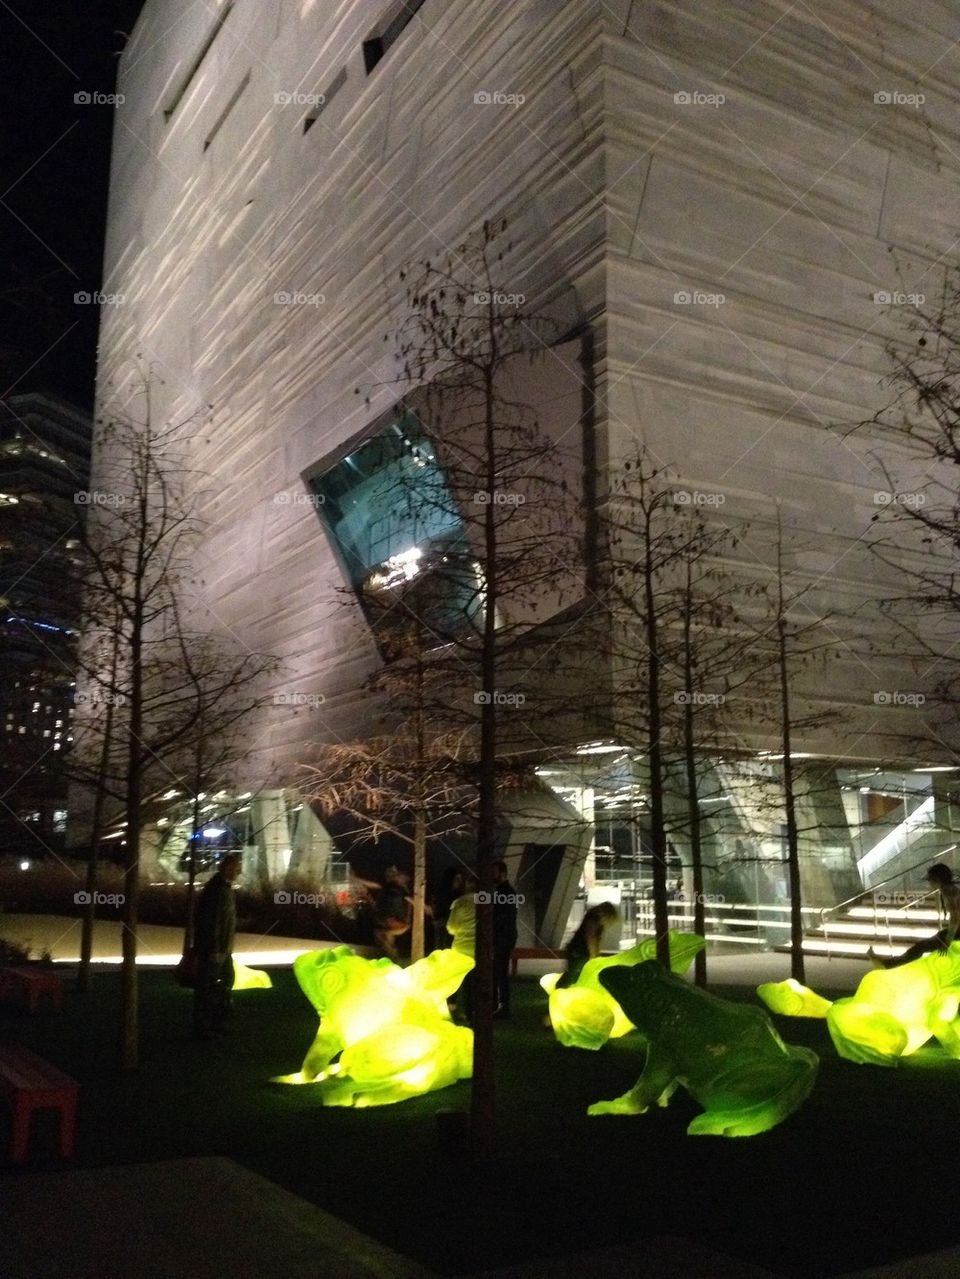 Perot science Museum at night